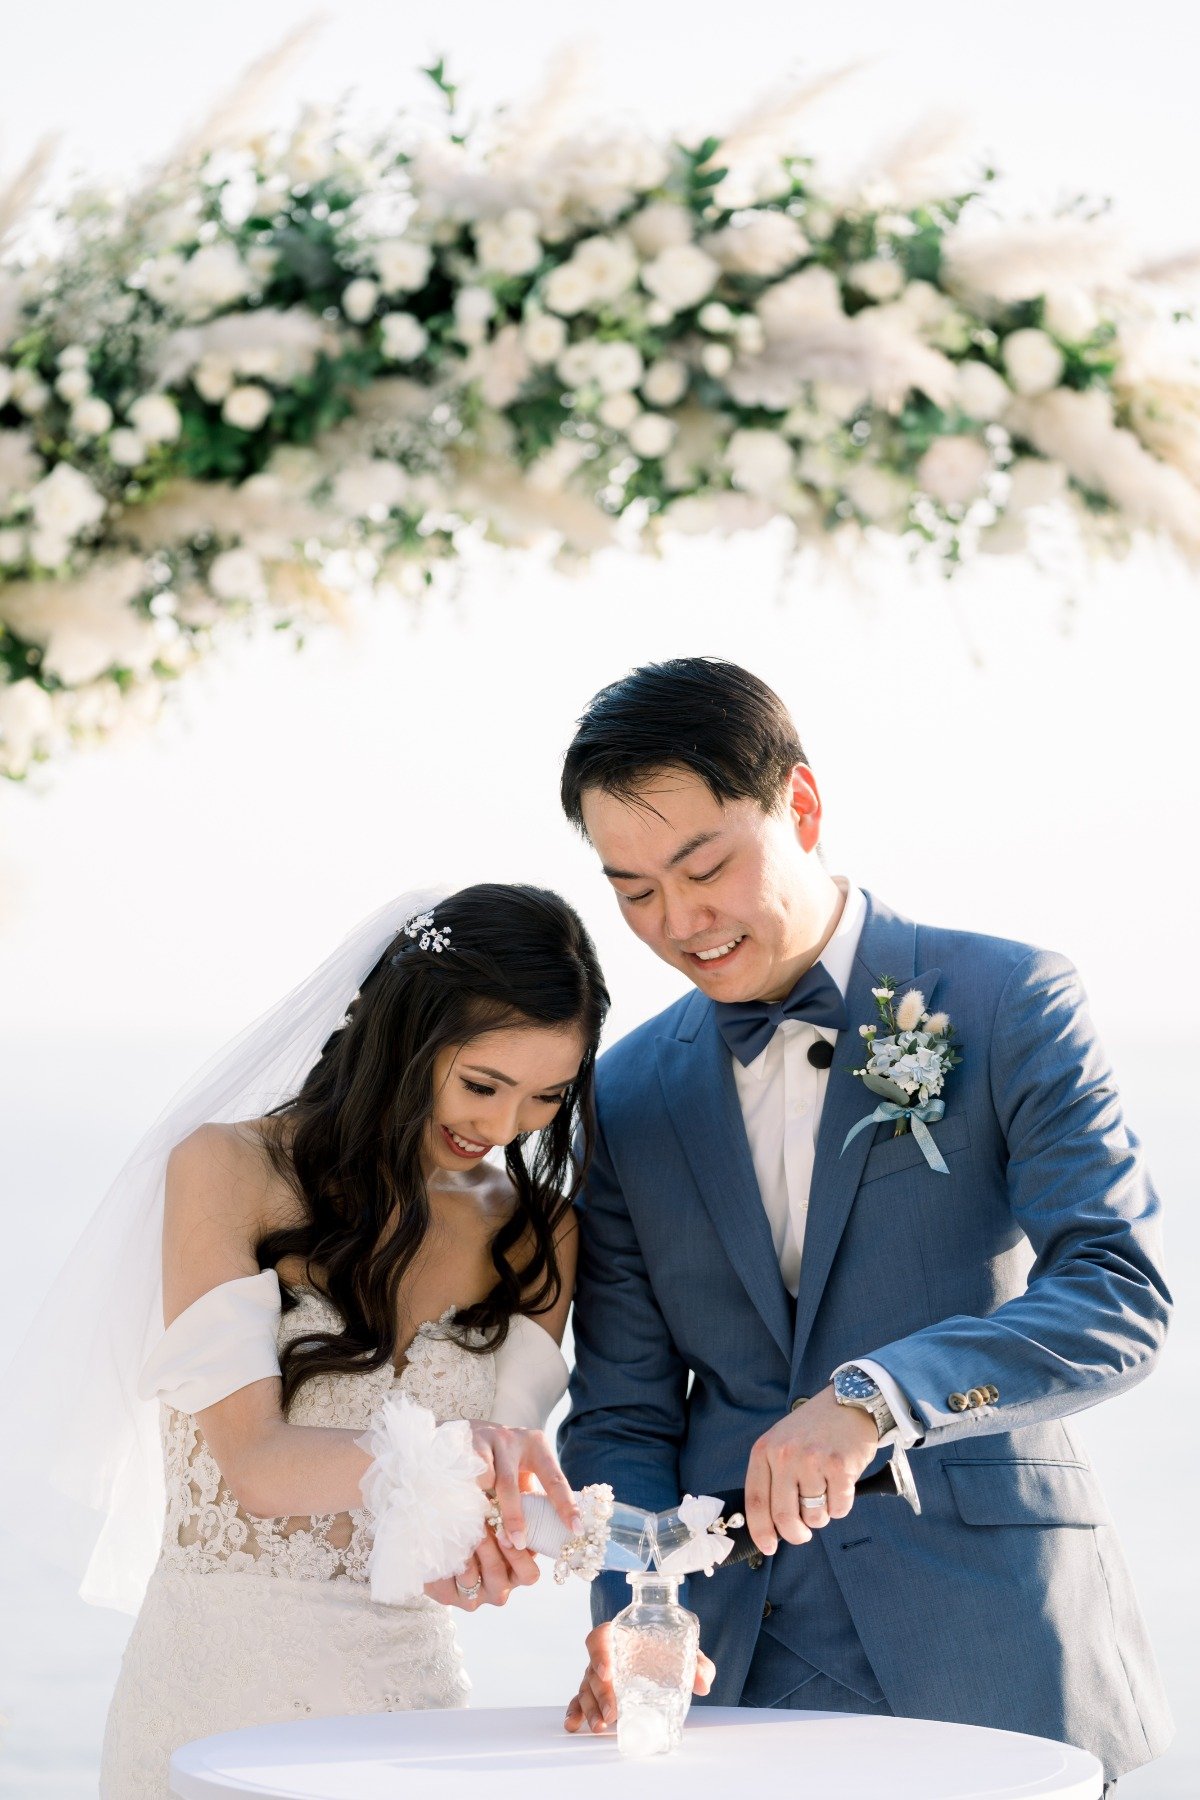 Over-The-Top Micro Wedding In Thailand That You Have To See To Believe